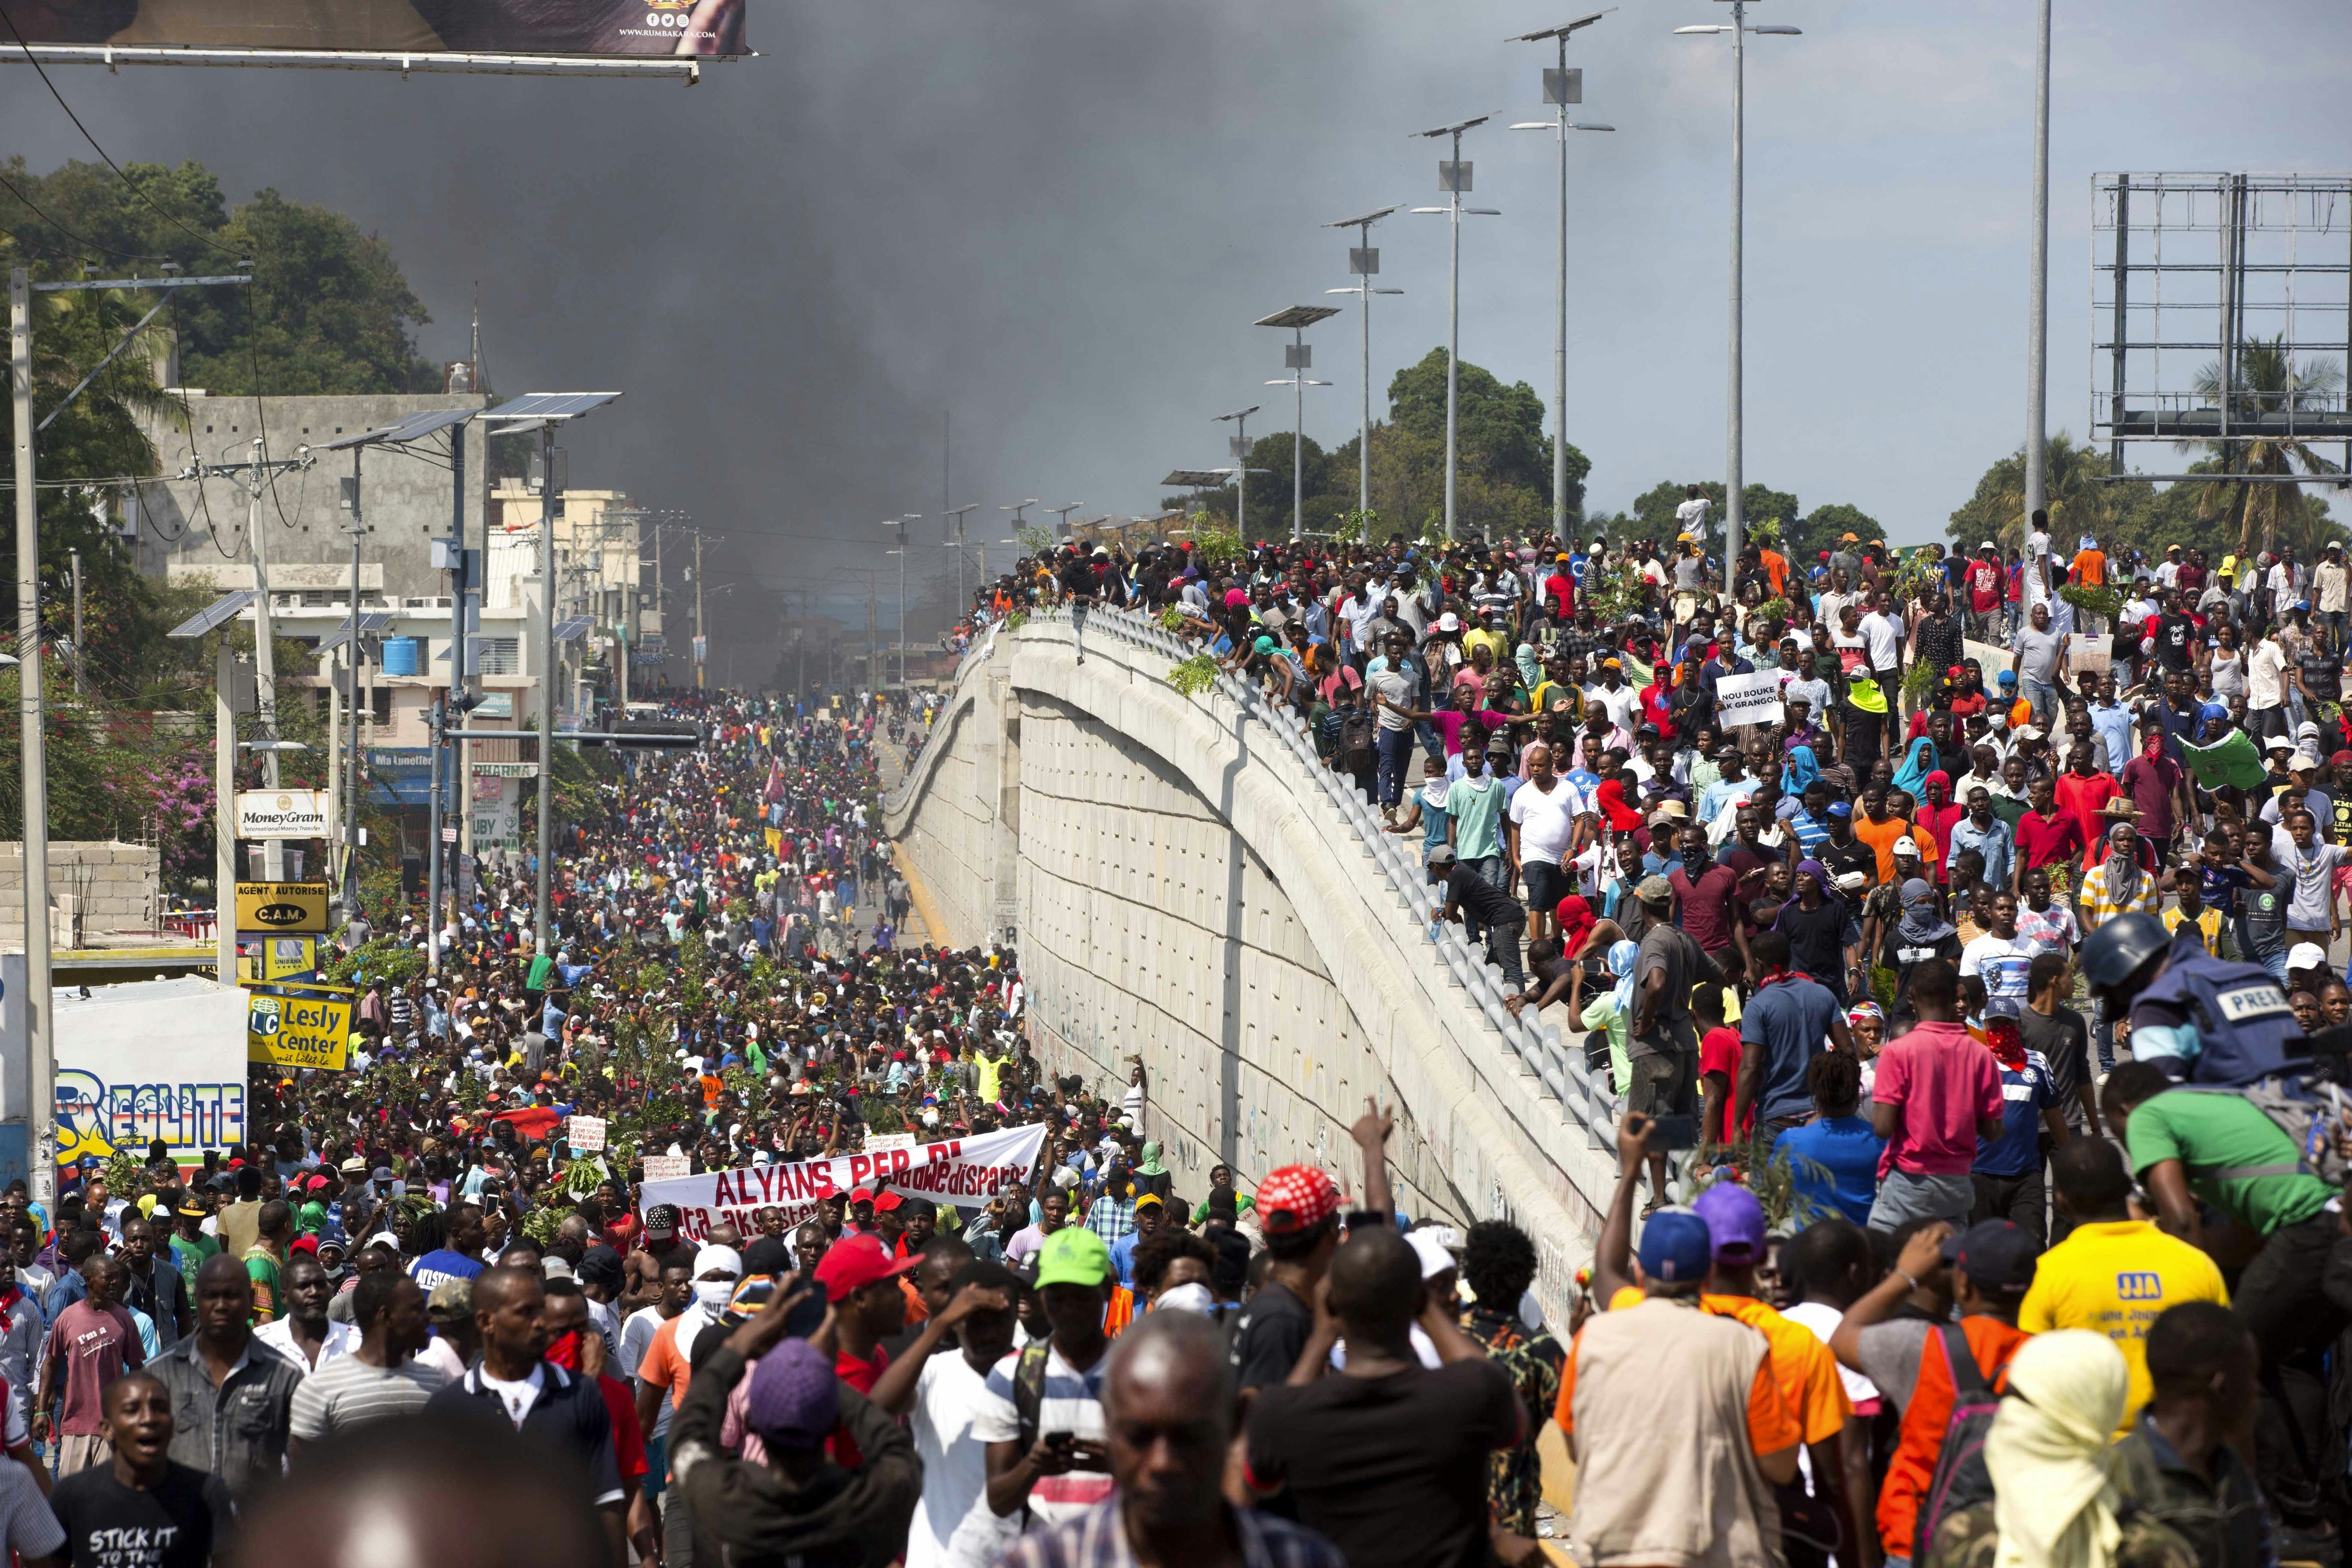 Thousands of demonstrators march in the street as they chant anti-government slogans during a protest to demand the resignation of President Jovenel Moise and demanding to know how Petro Caribe funds have been used by the current and past administrations, in Port-au-Prince, Haiti, Thursday, Feb. 7, 2019. Much of the financial support to help Haiti rebuild after the 2010 earthquake comes from Venezuela's Petro Caribe fund, a 2005 pact that gives suppliers below-market financing for oil and is under the control of the central government. (AP Photo/Dieu Nalio Chery)